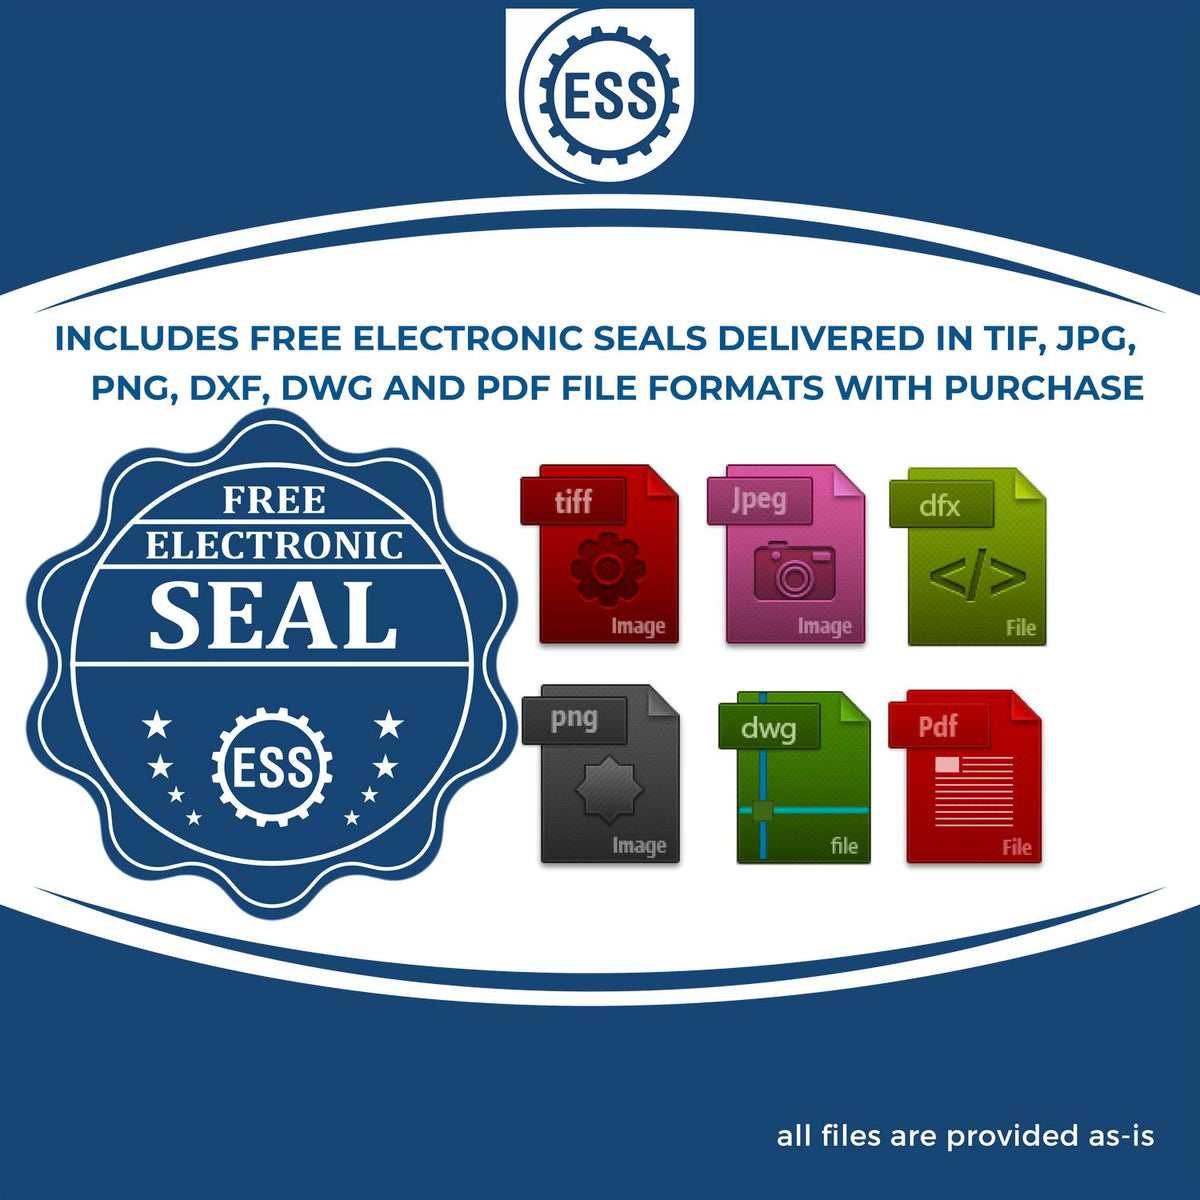 An infographic for the free electronic seal for the Self-Inking Vermont Landscape Architect Stamp illustrating the different file type icons such as DXF, DWG, TIF, JPG and PNG.